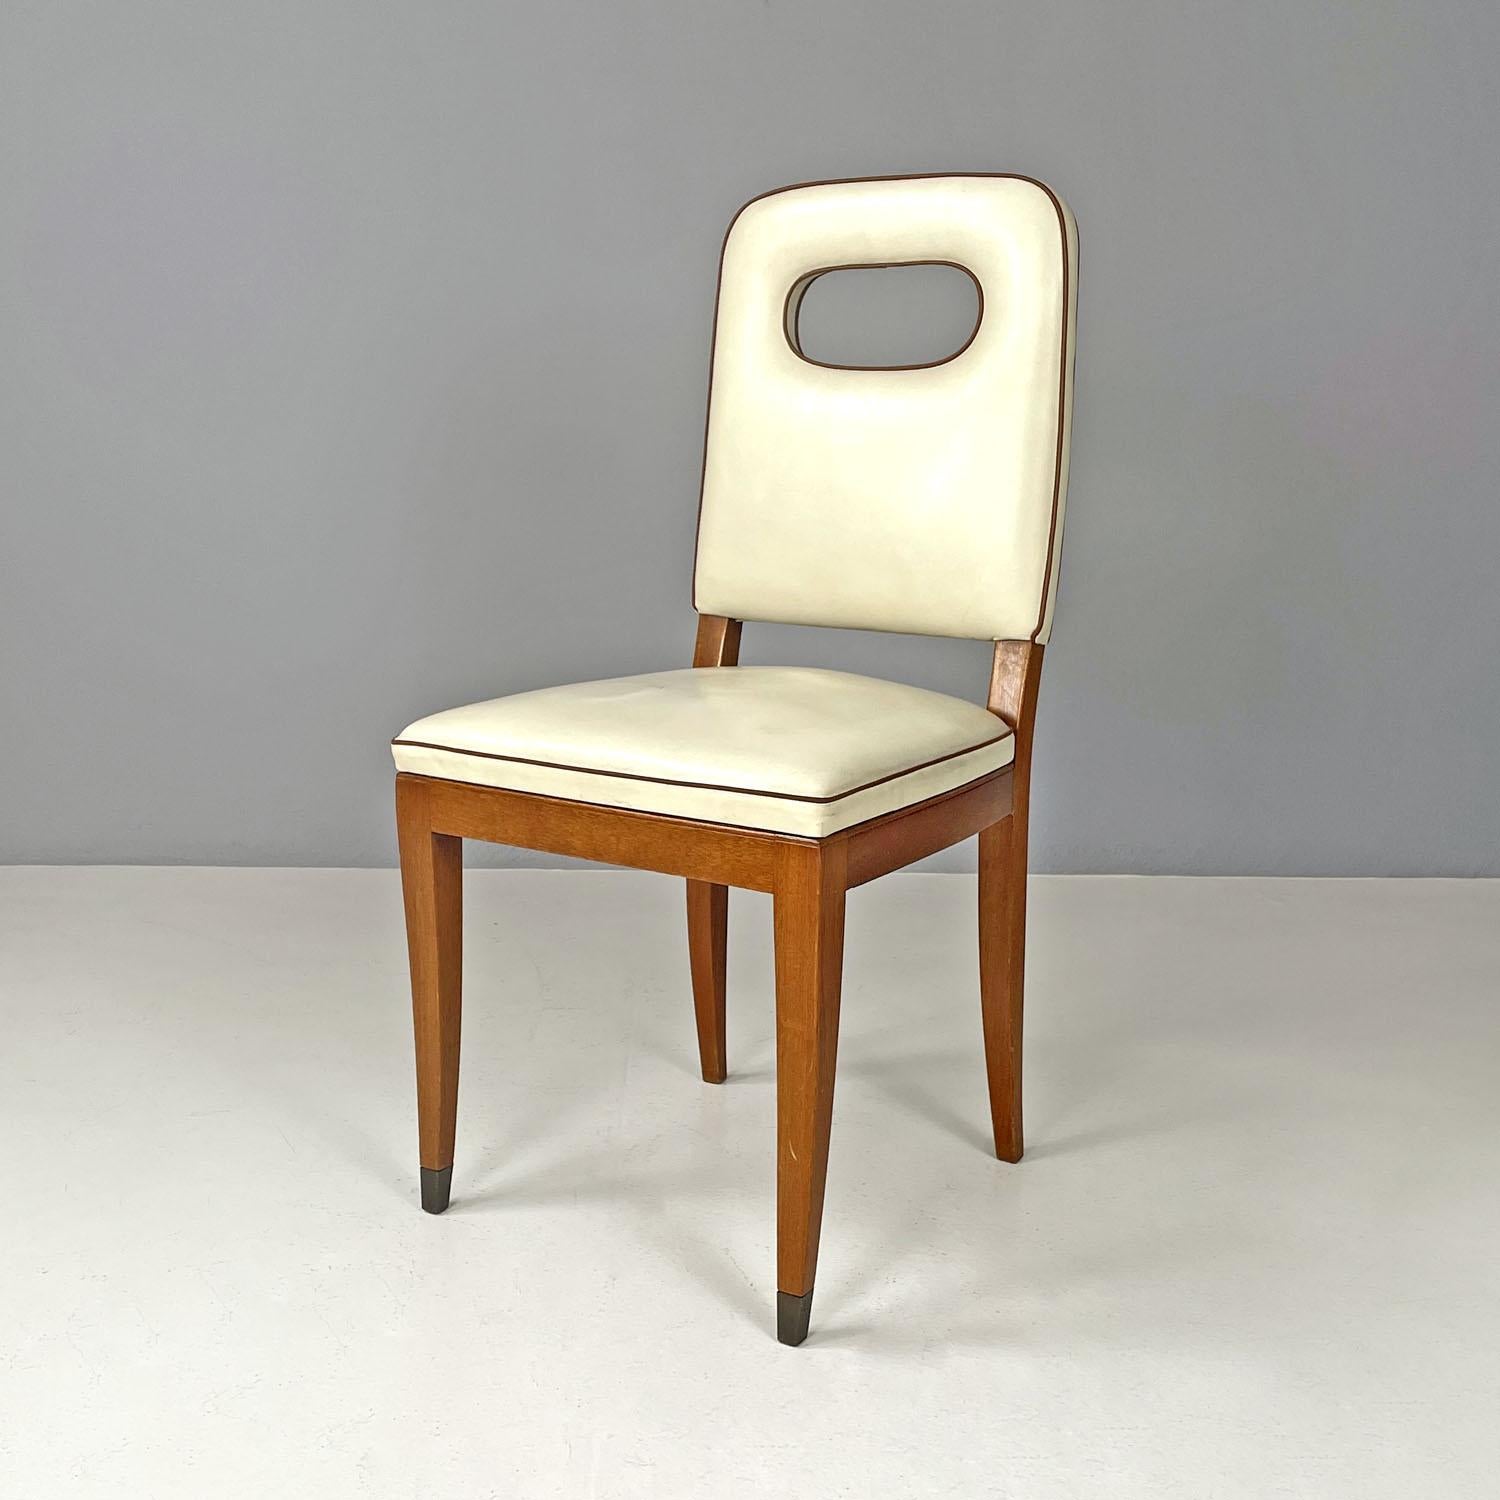 Italian Art Deco white leather and wood chair by Giovanni Gariboldi, 1940s
Chair with rectangular seat with wooden structure. The seat and back are padded and covered in white leather with brown leather profiles, fixed to the structure using white